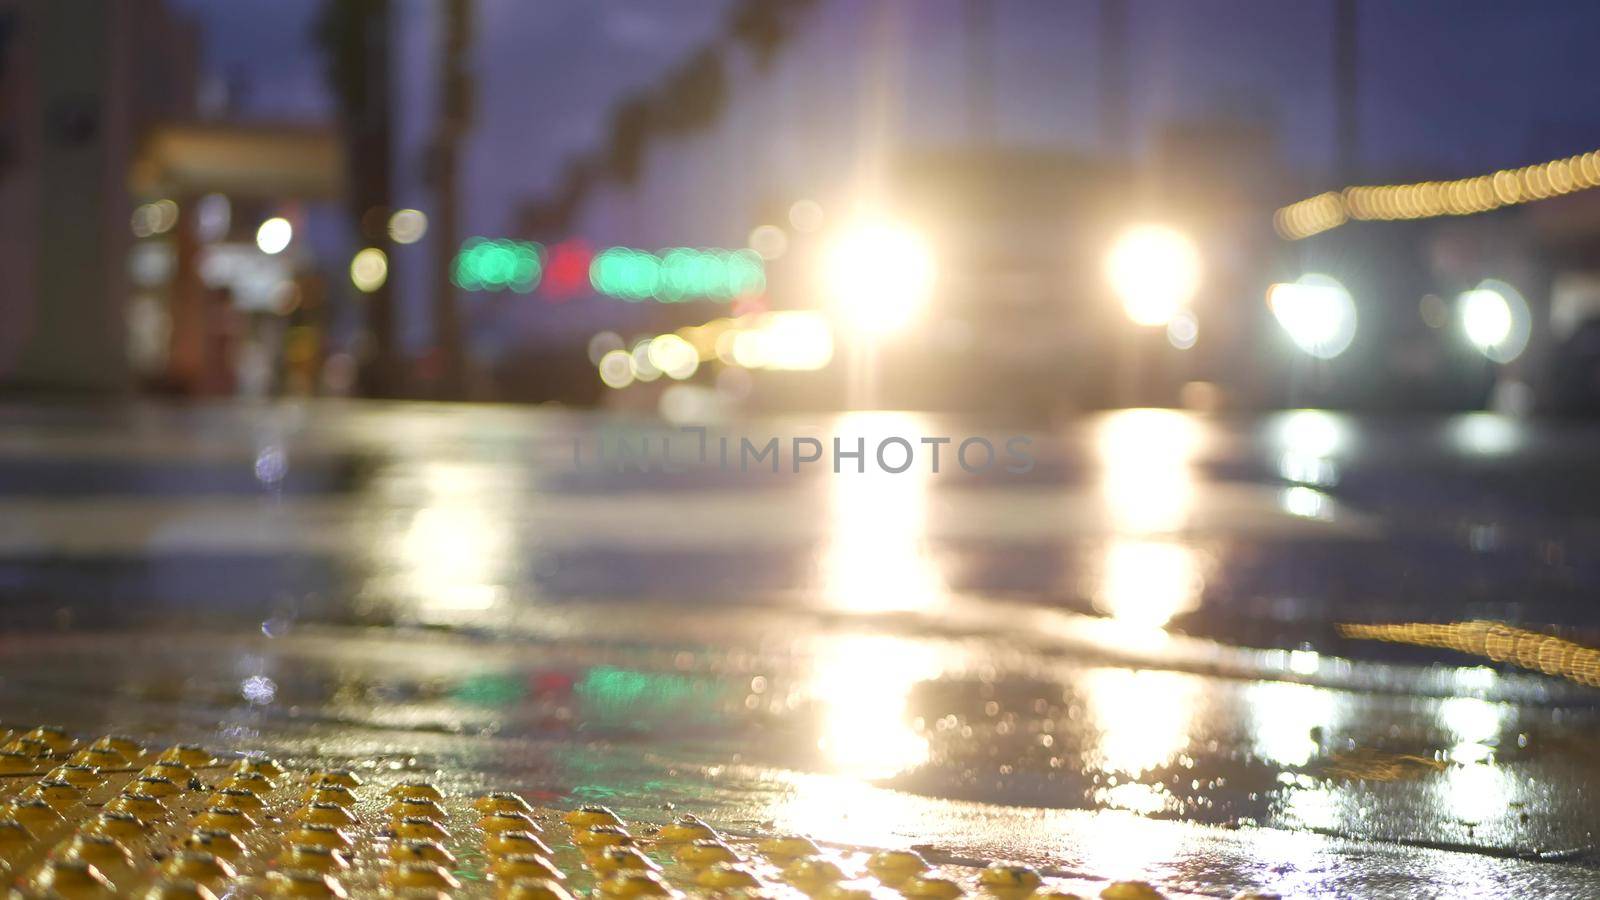 Lights reflection on road in rainy weather. Palm trees and rainfall, California. by DogoraSun